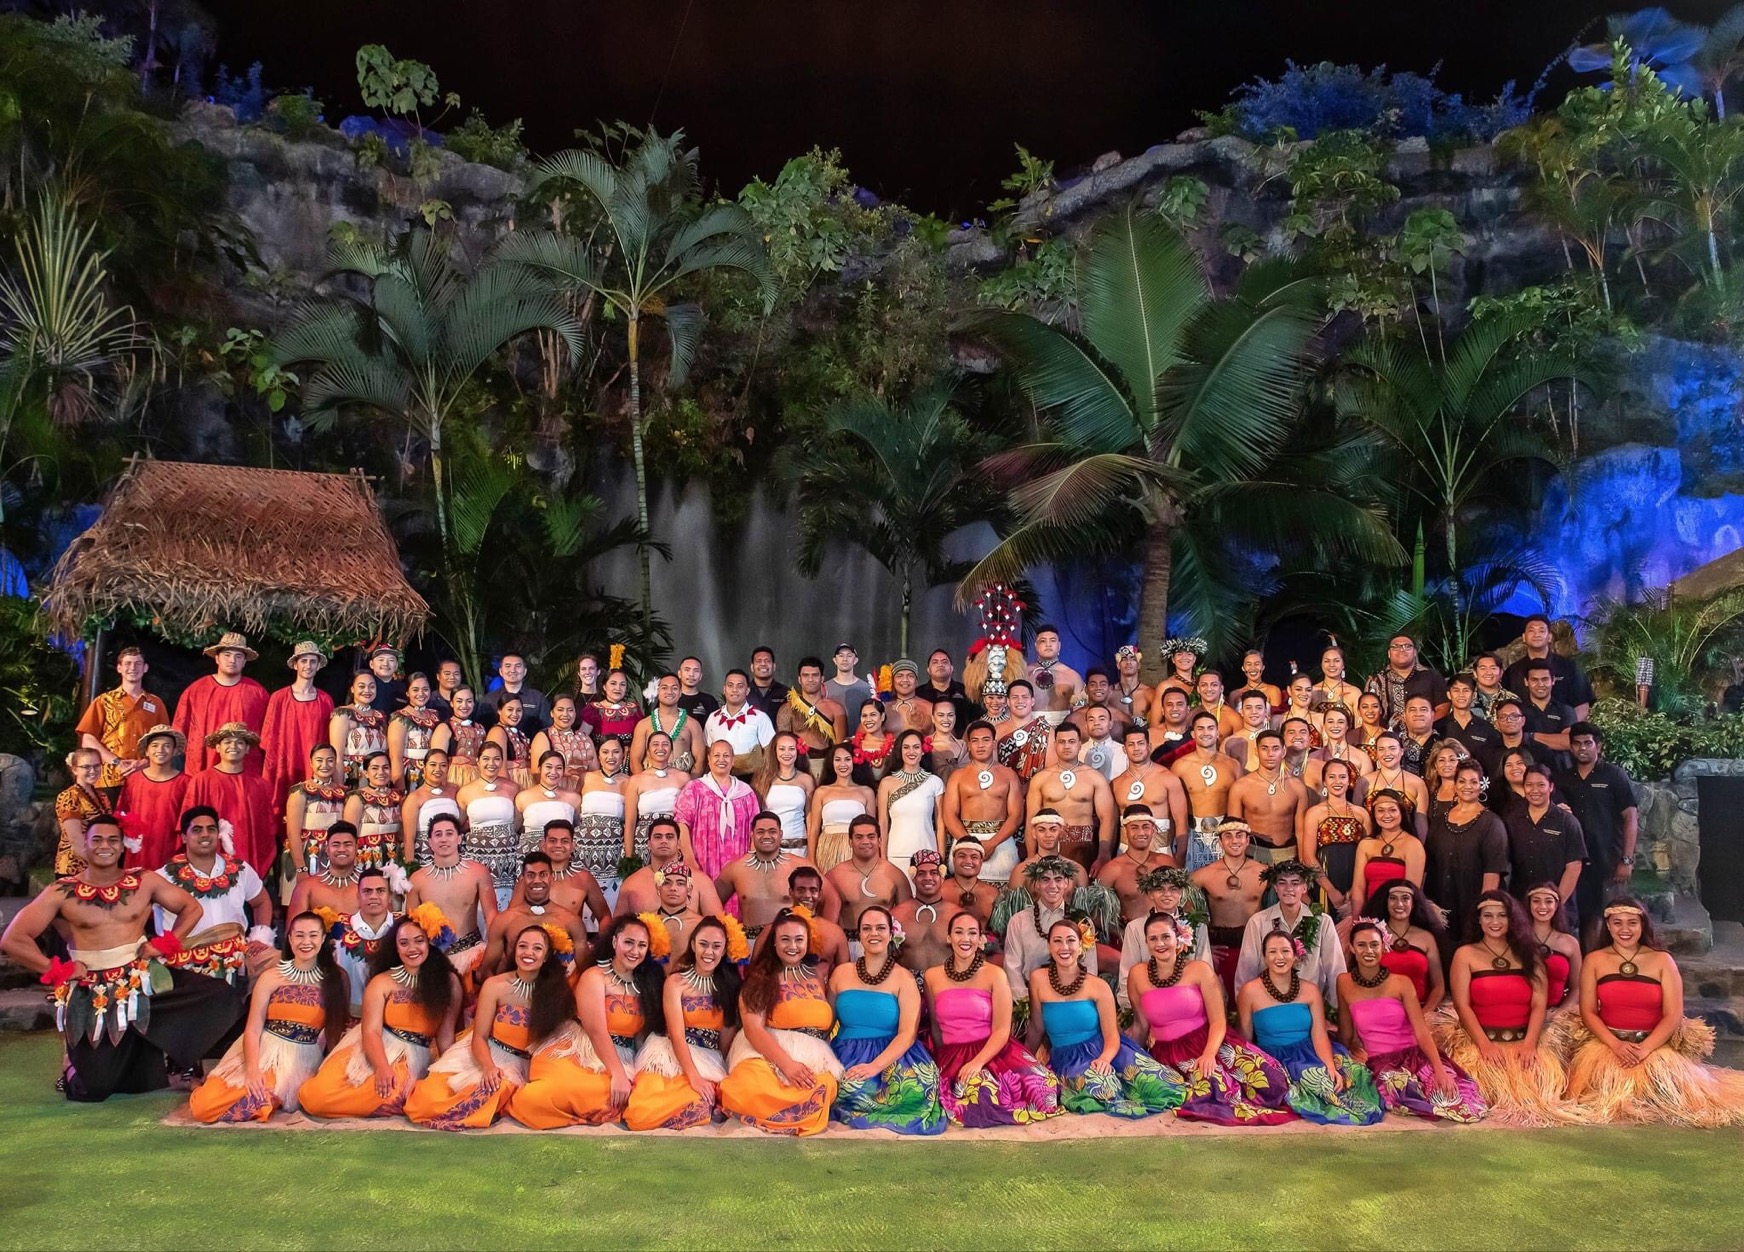 lead image of "Celebrate the spirit of diversity here at the Polynesian Cultural Center" blog.